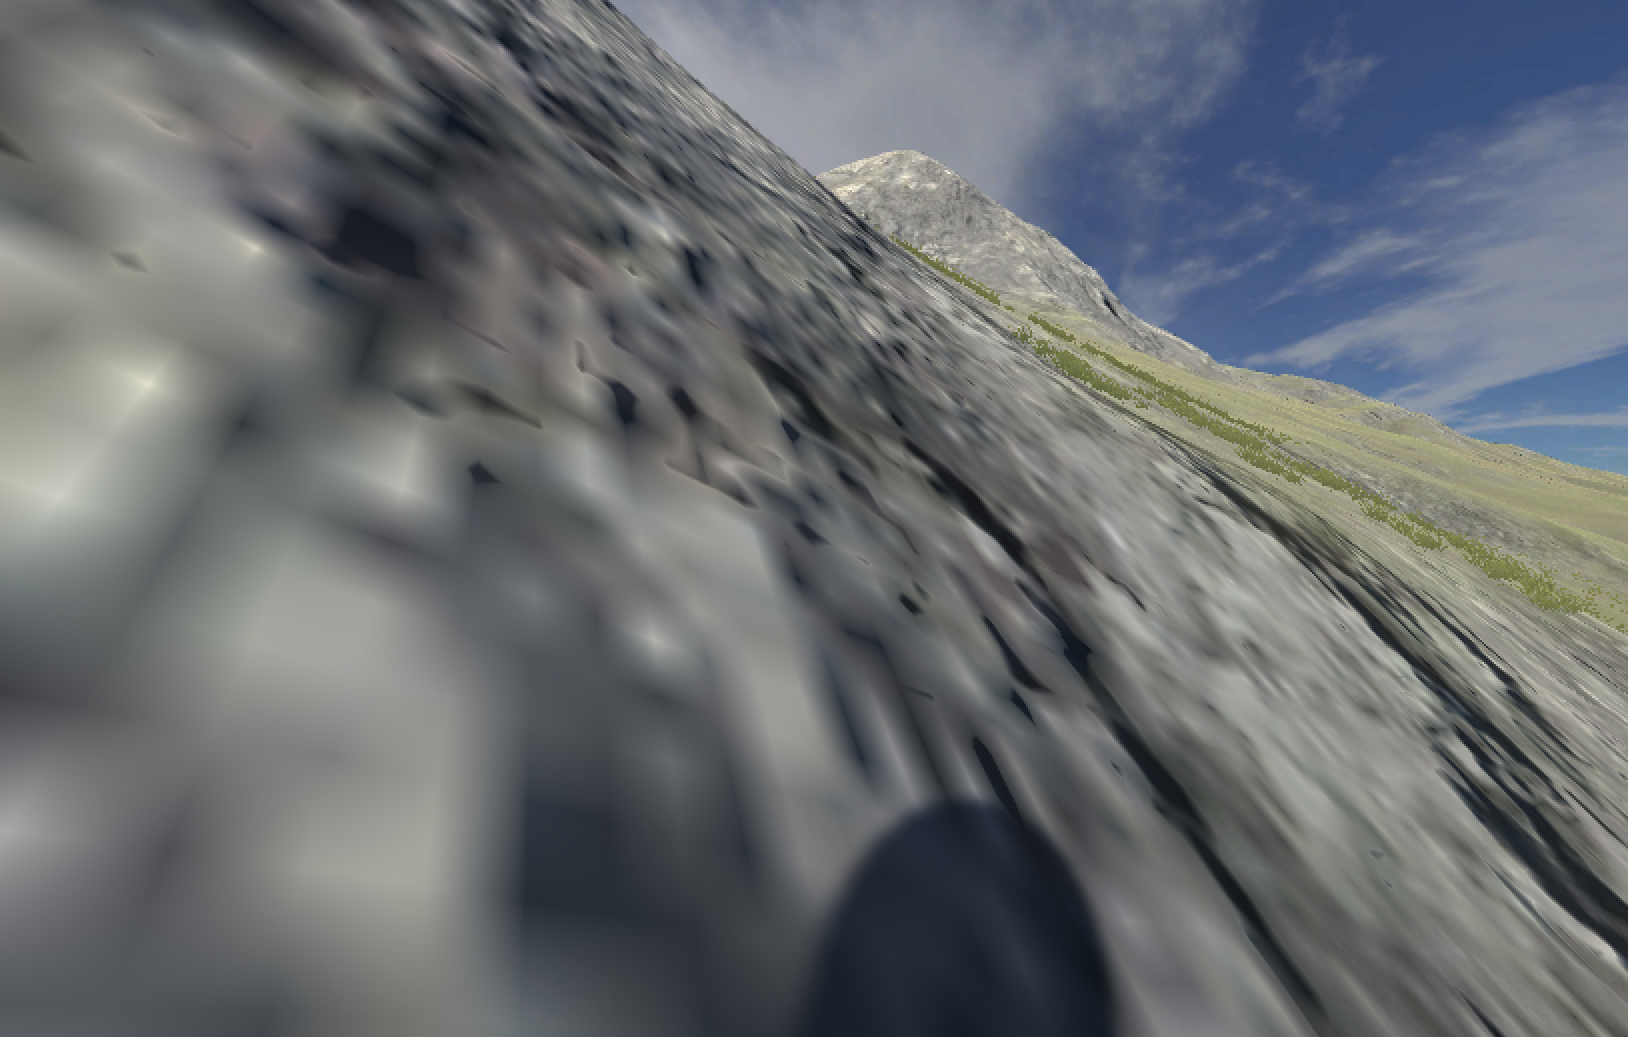 Example of terrain textures in the game